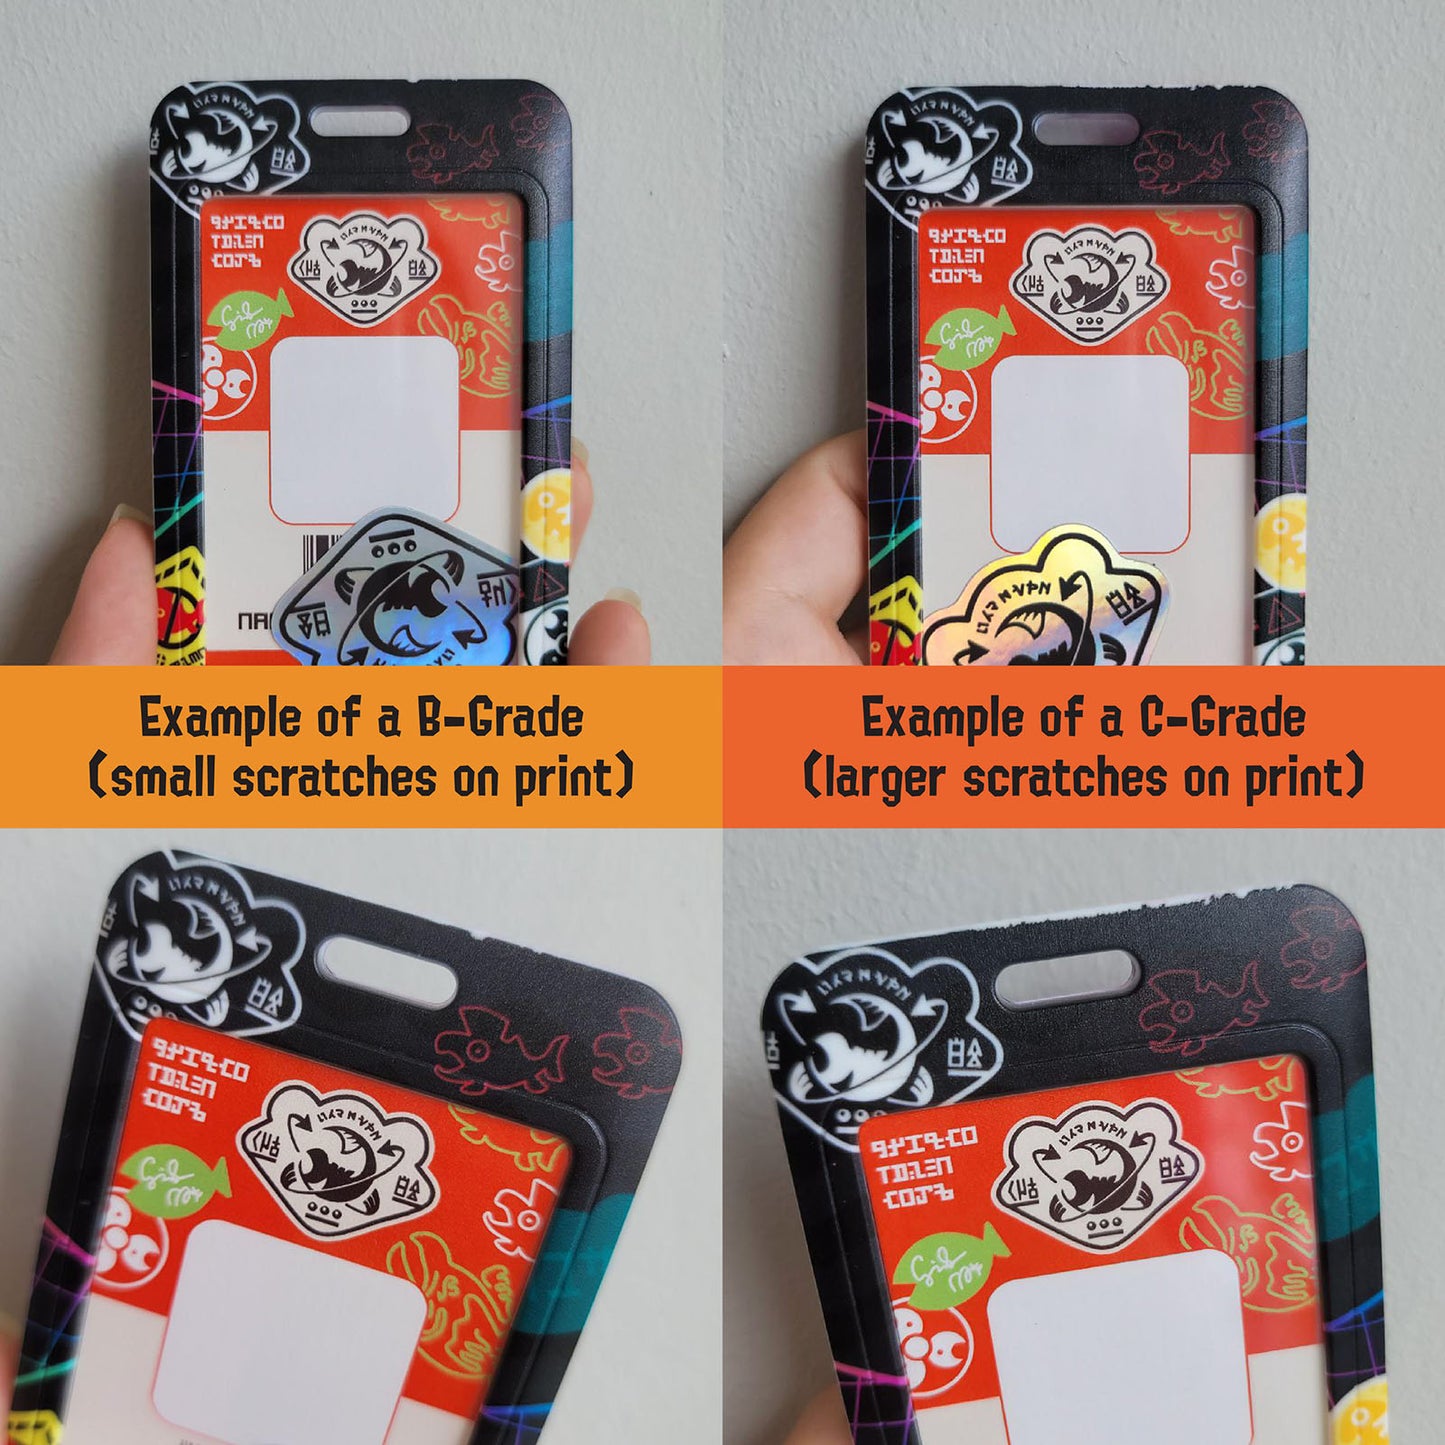 Ships from 22 June | Grizzco Card Holder & Enamel Pin